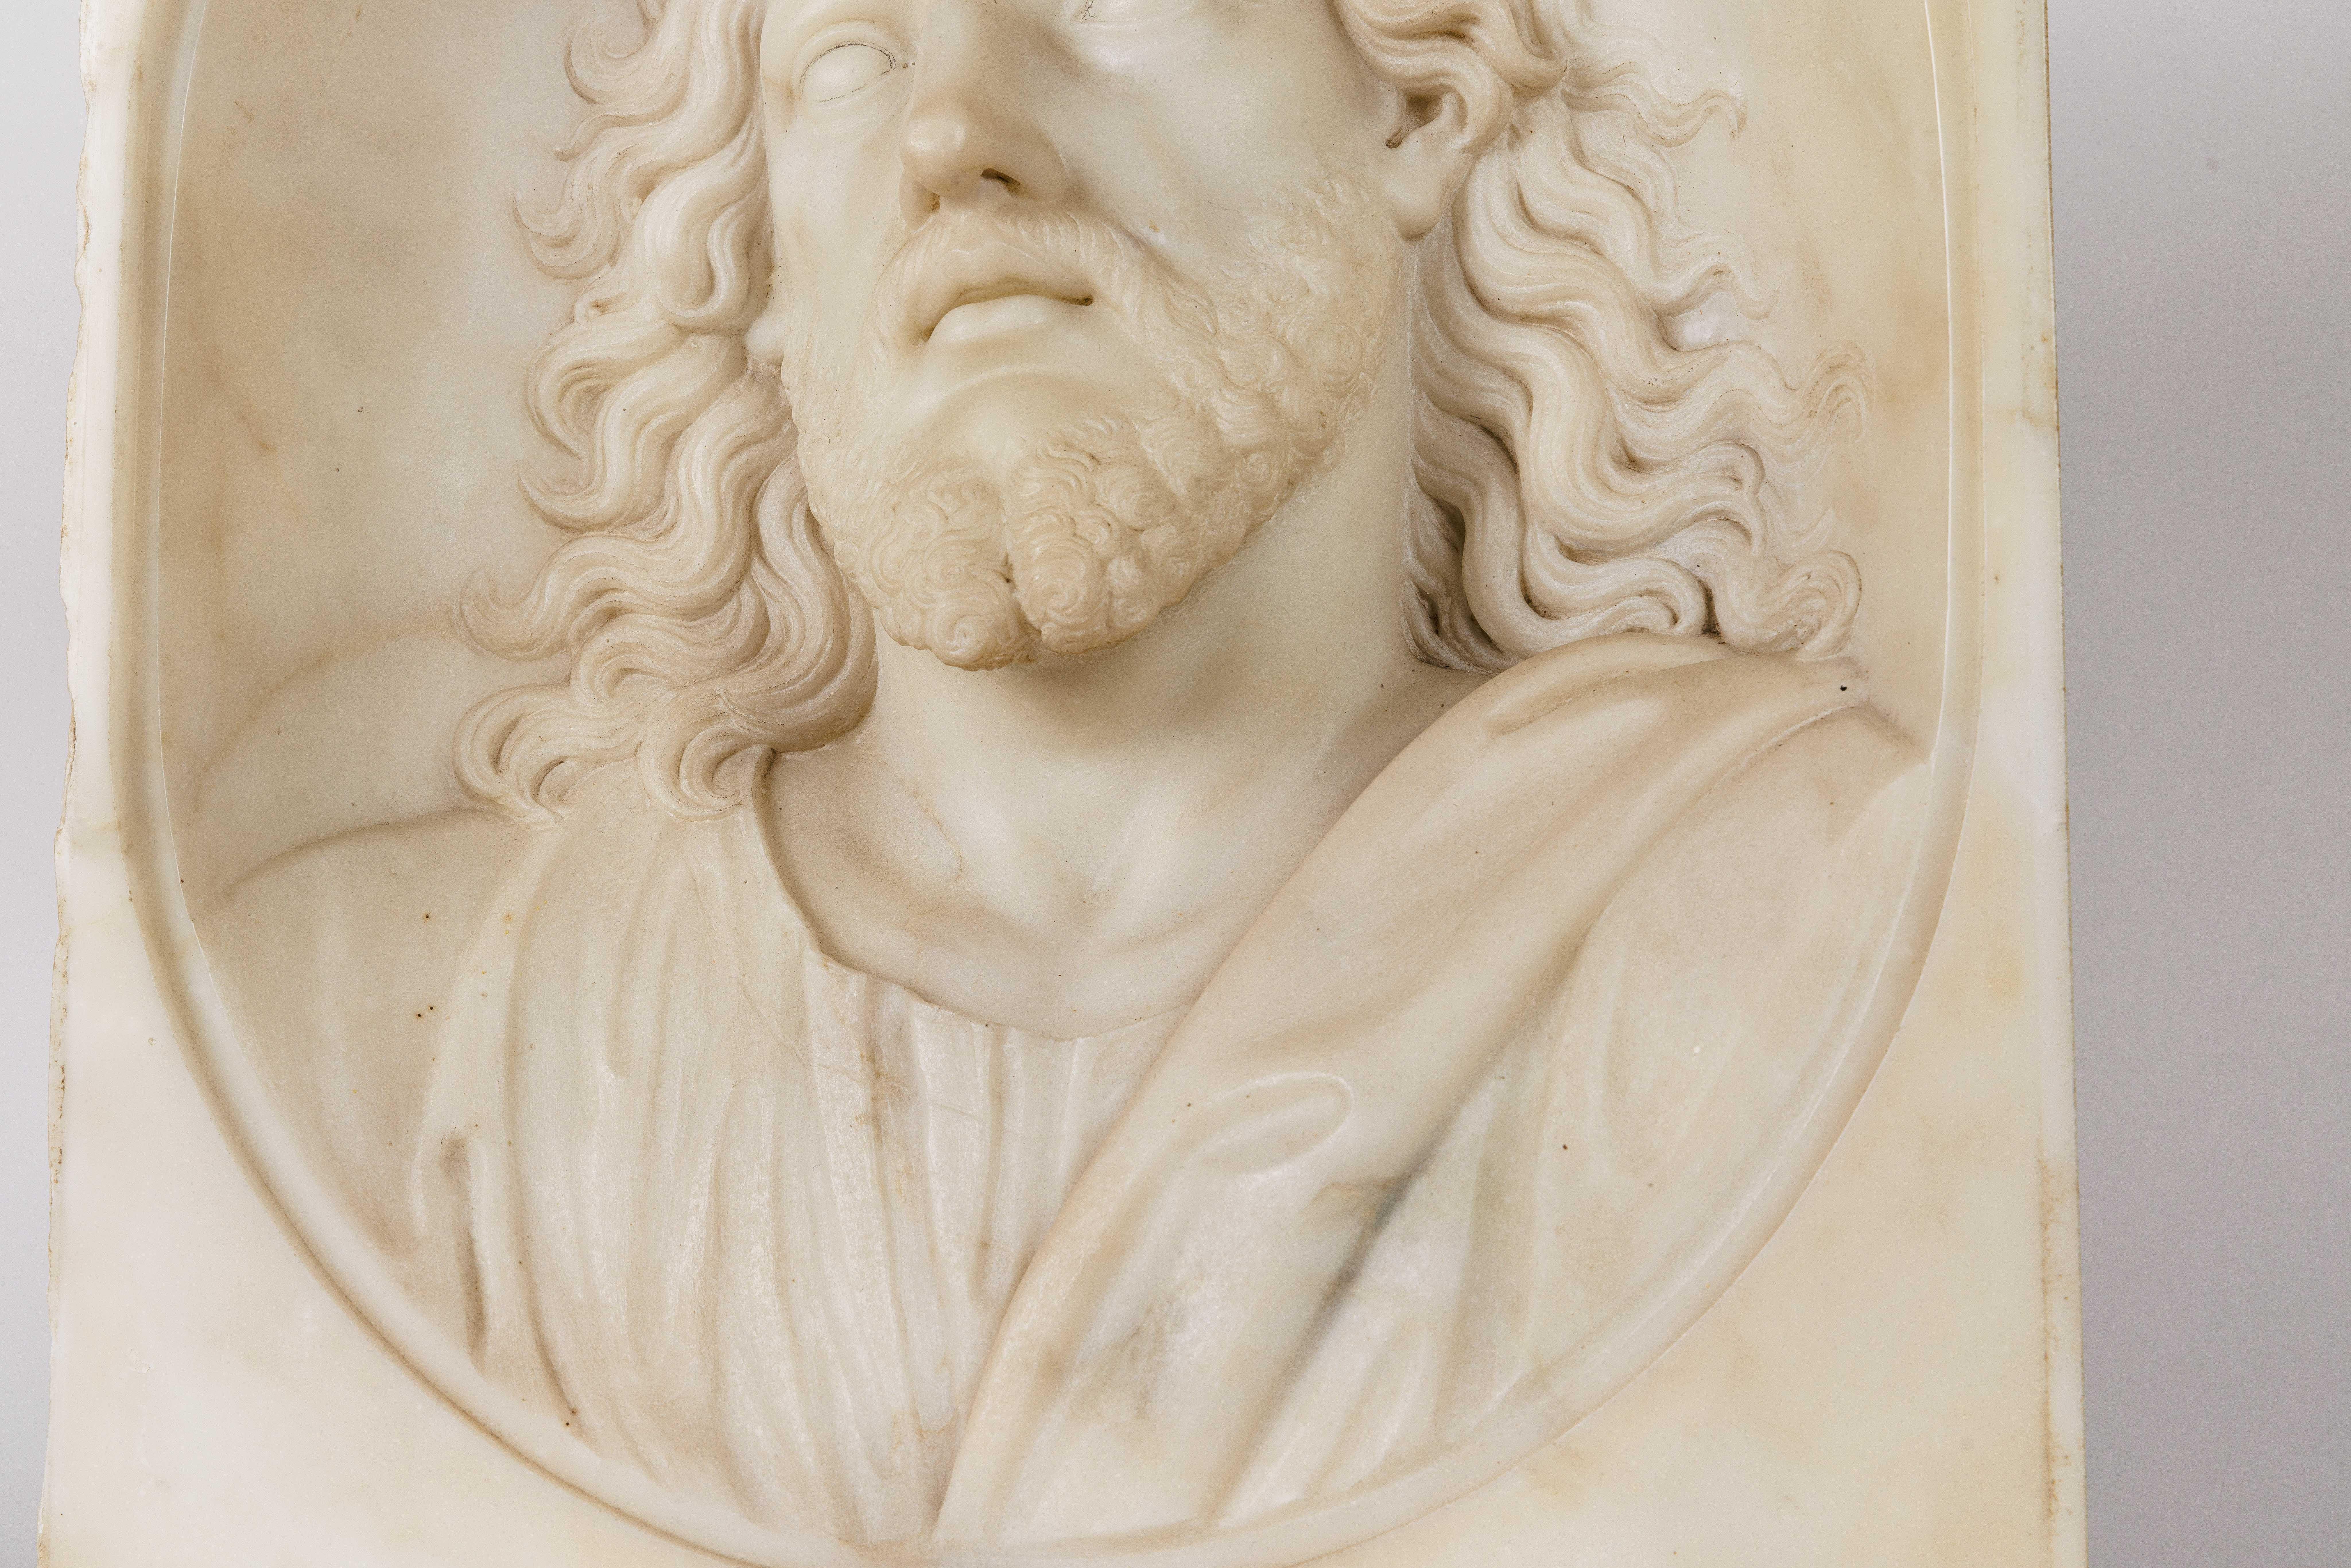 a marble sculpture image of resurrected christ